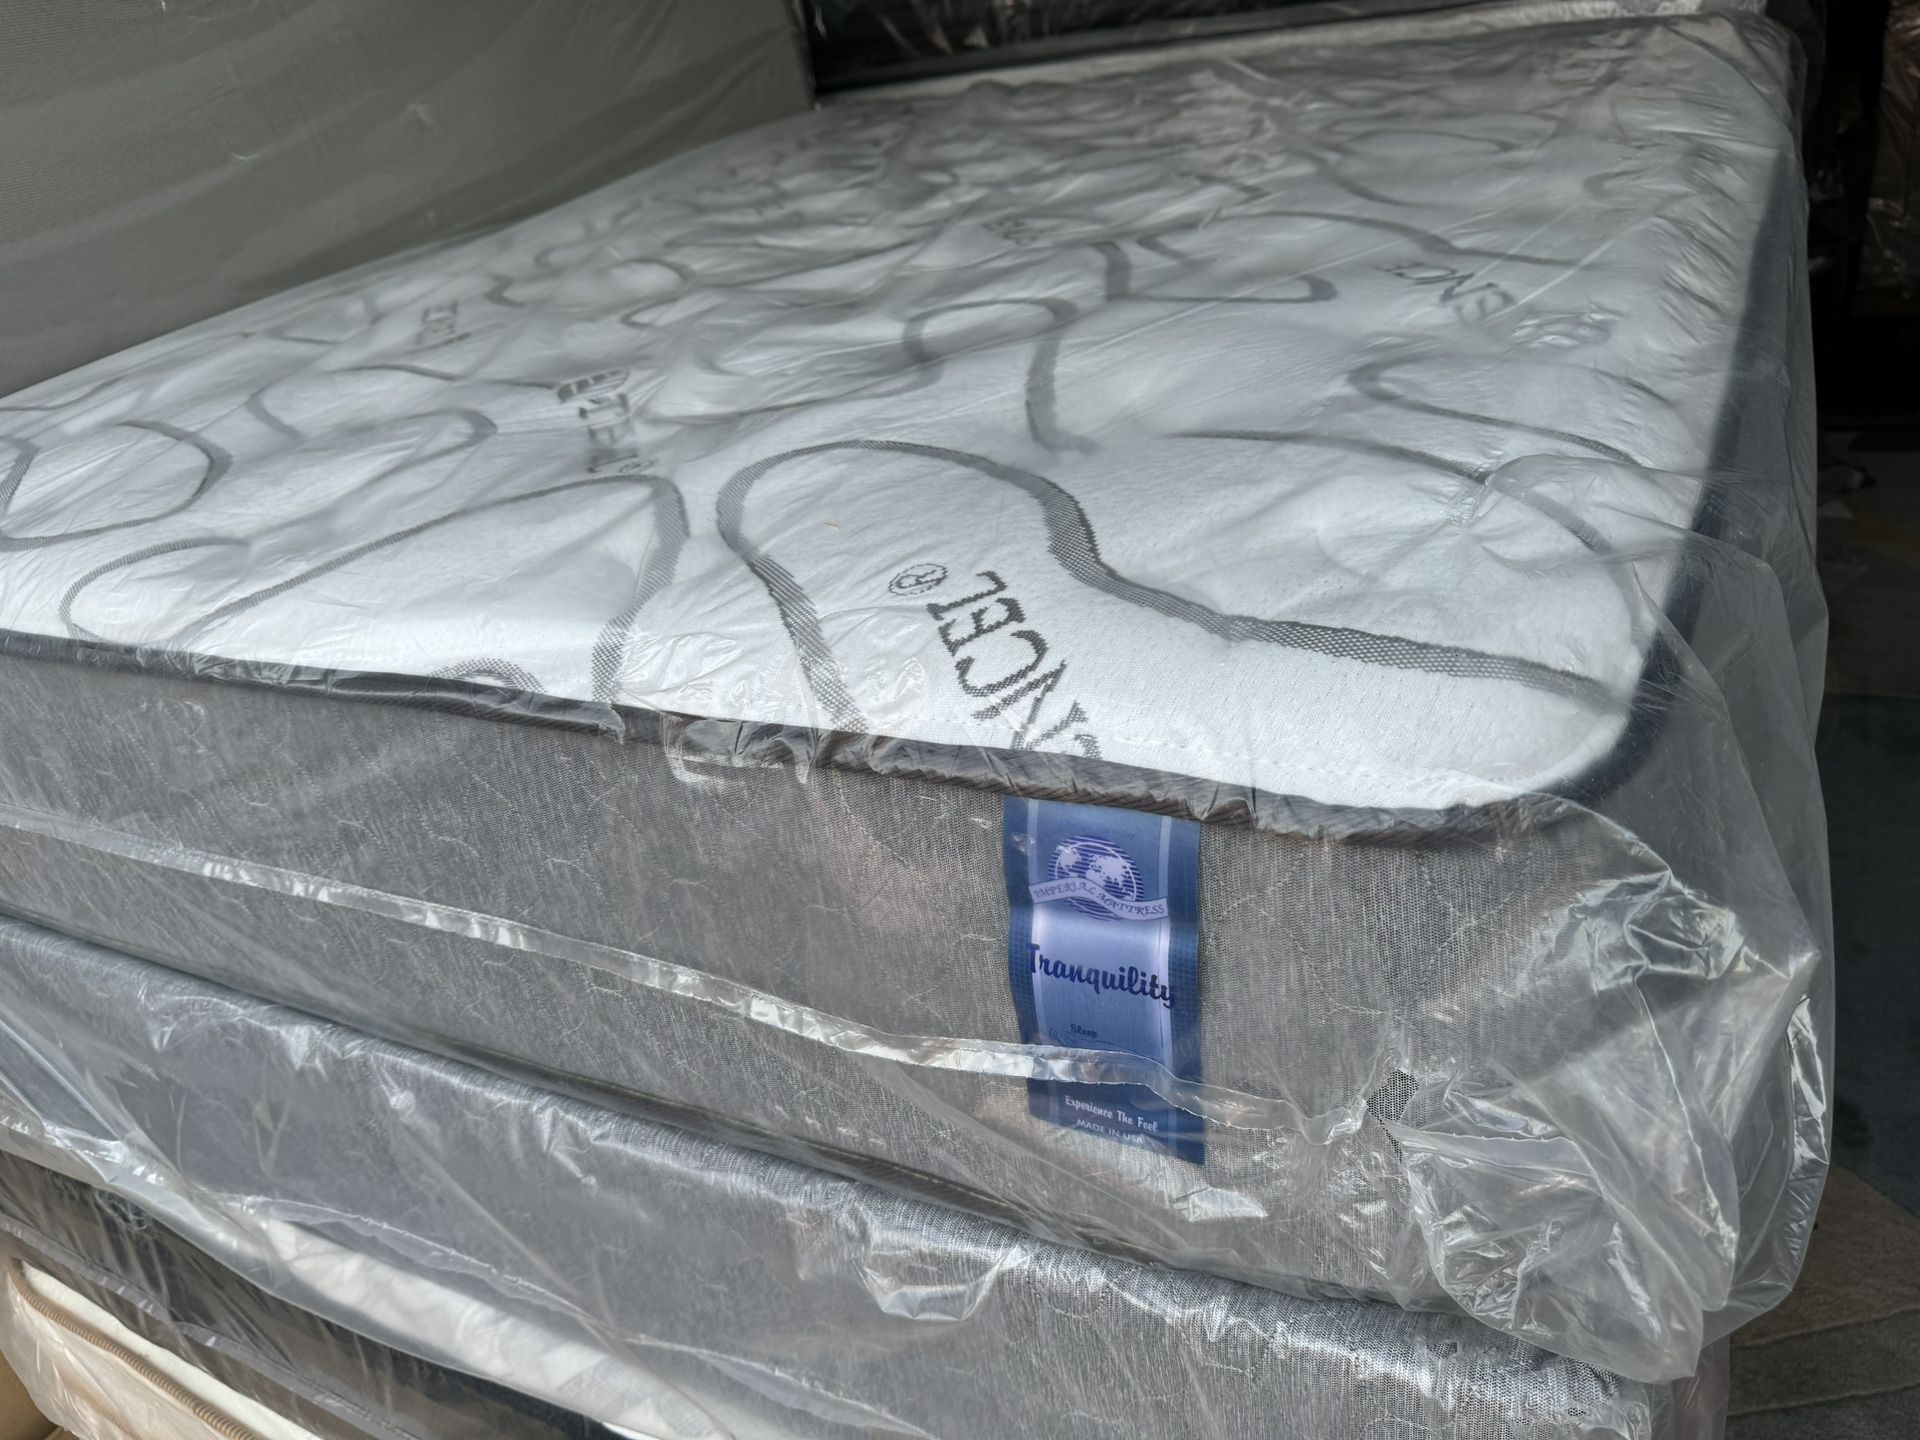 Brand New and good Quality Queen Mattress !&@ Free delivery!!